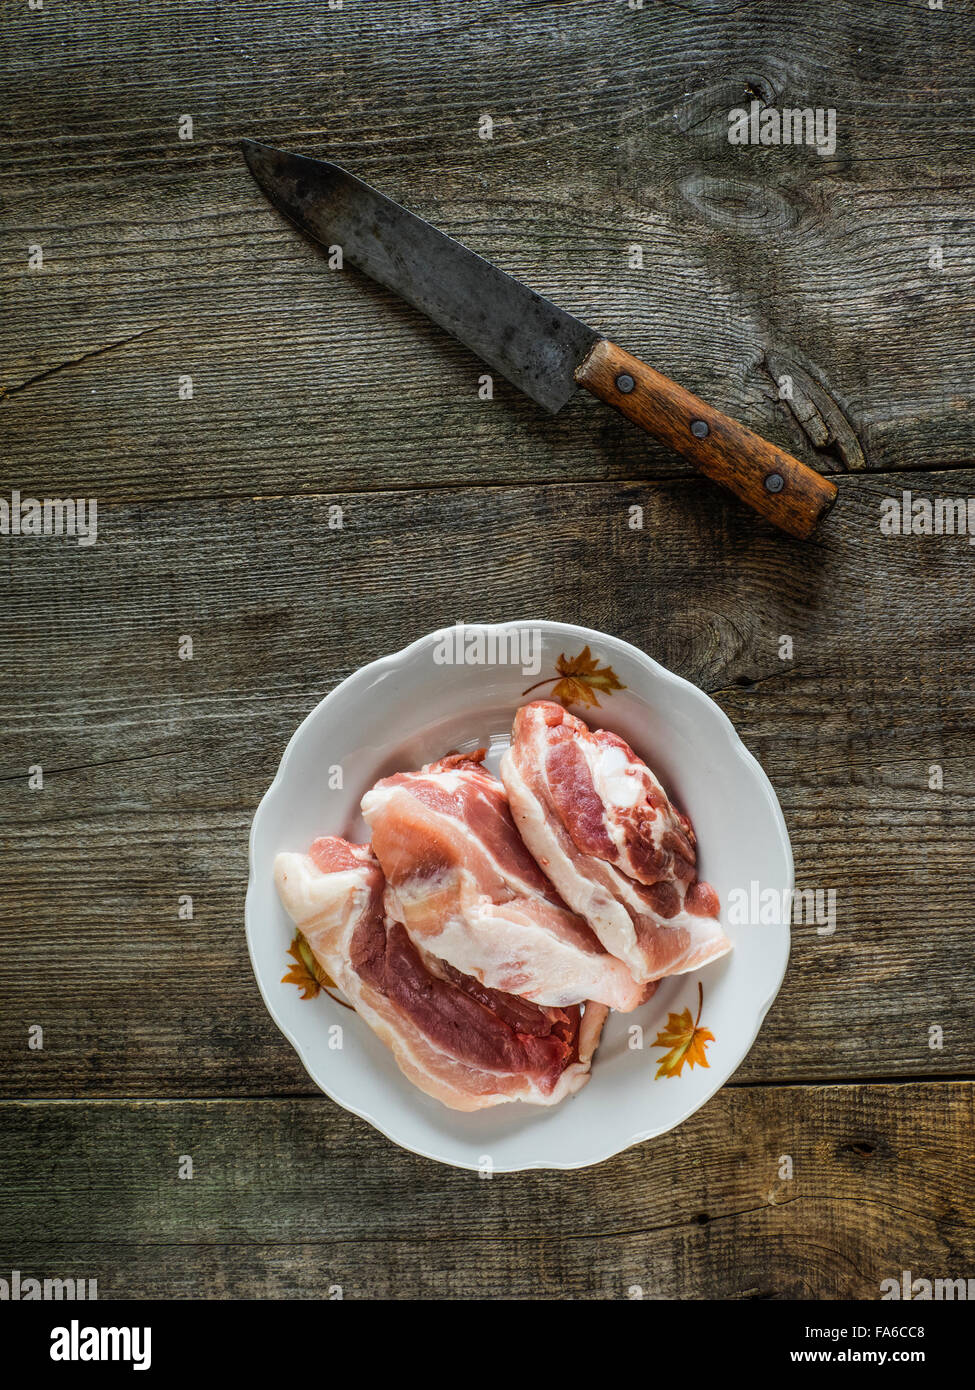 Plate of raw steaks and a knife on wooden background Stock Photo